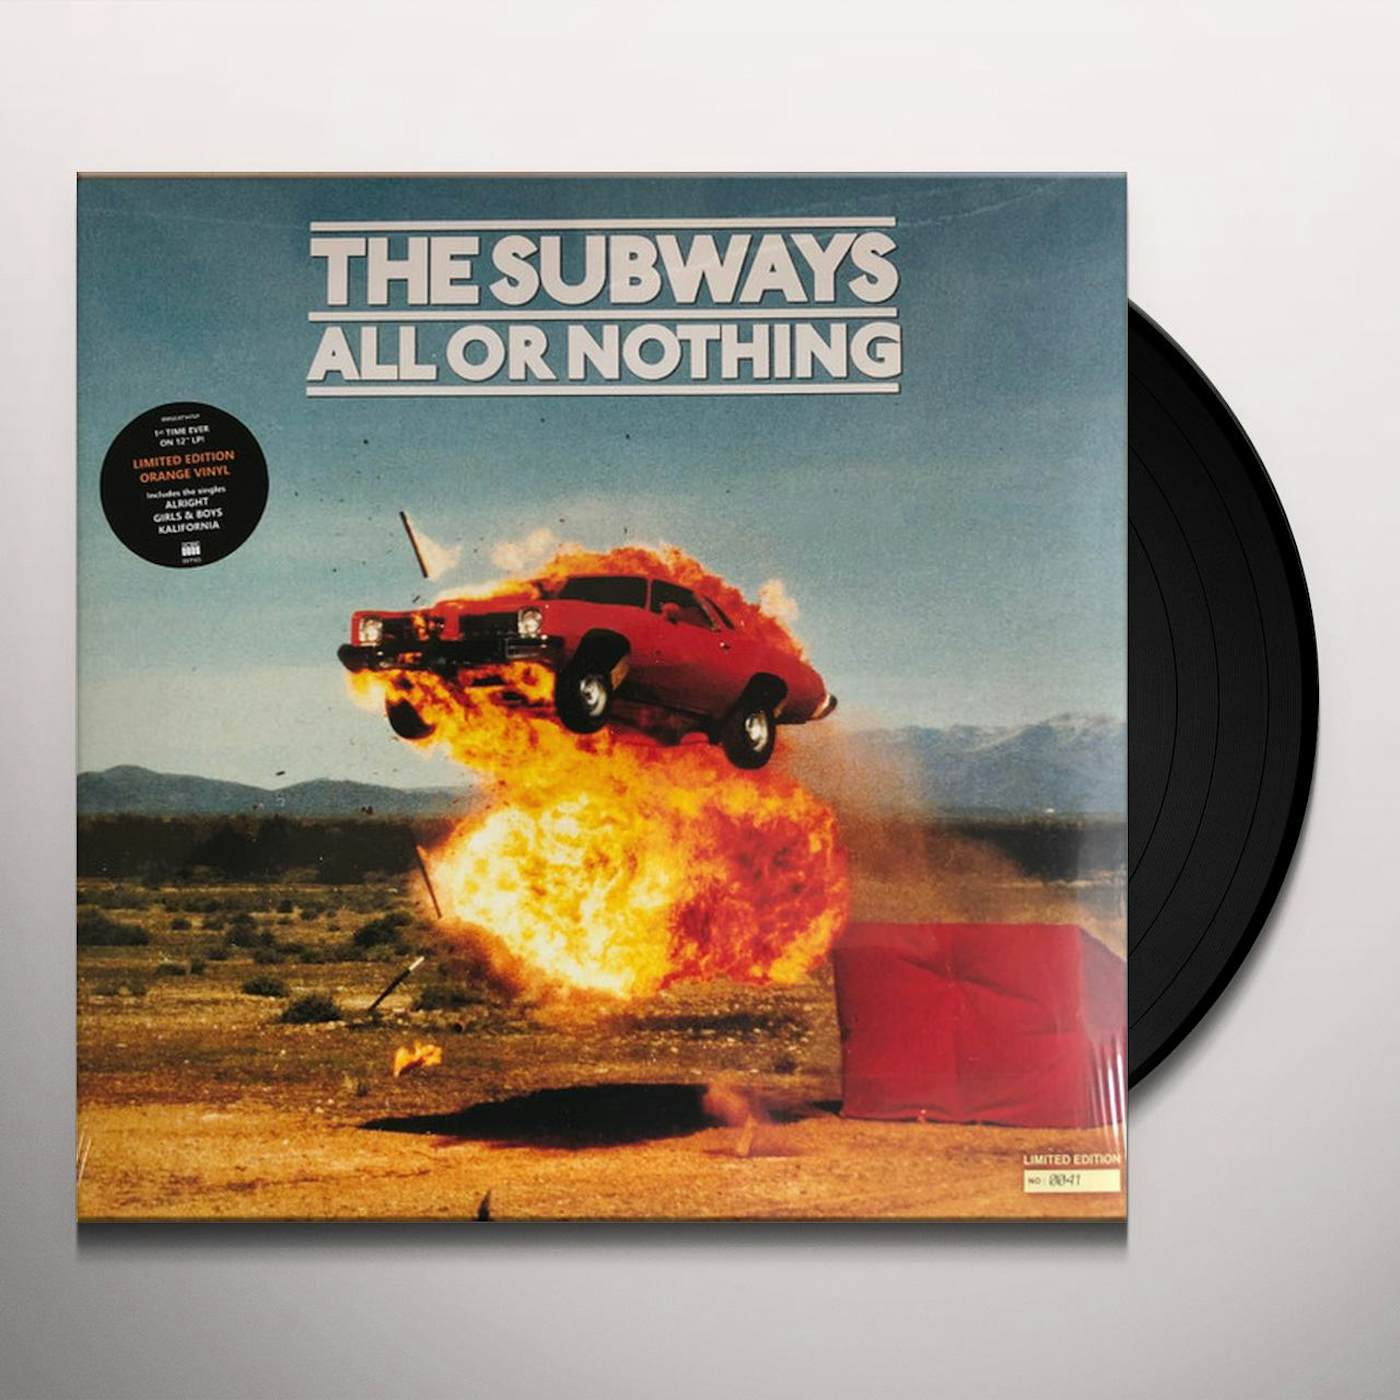 The Subways All or Nothing Vinyl Record